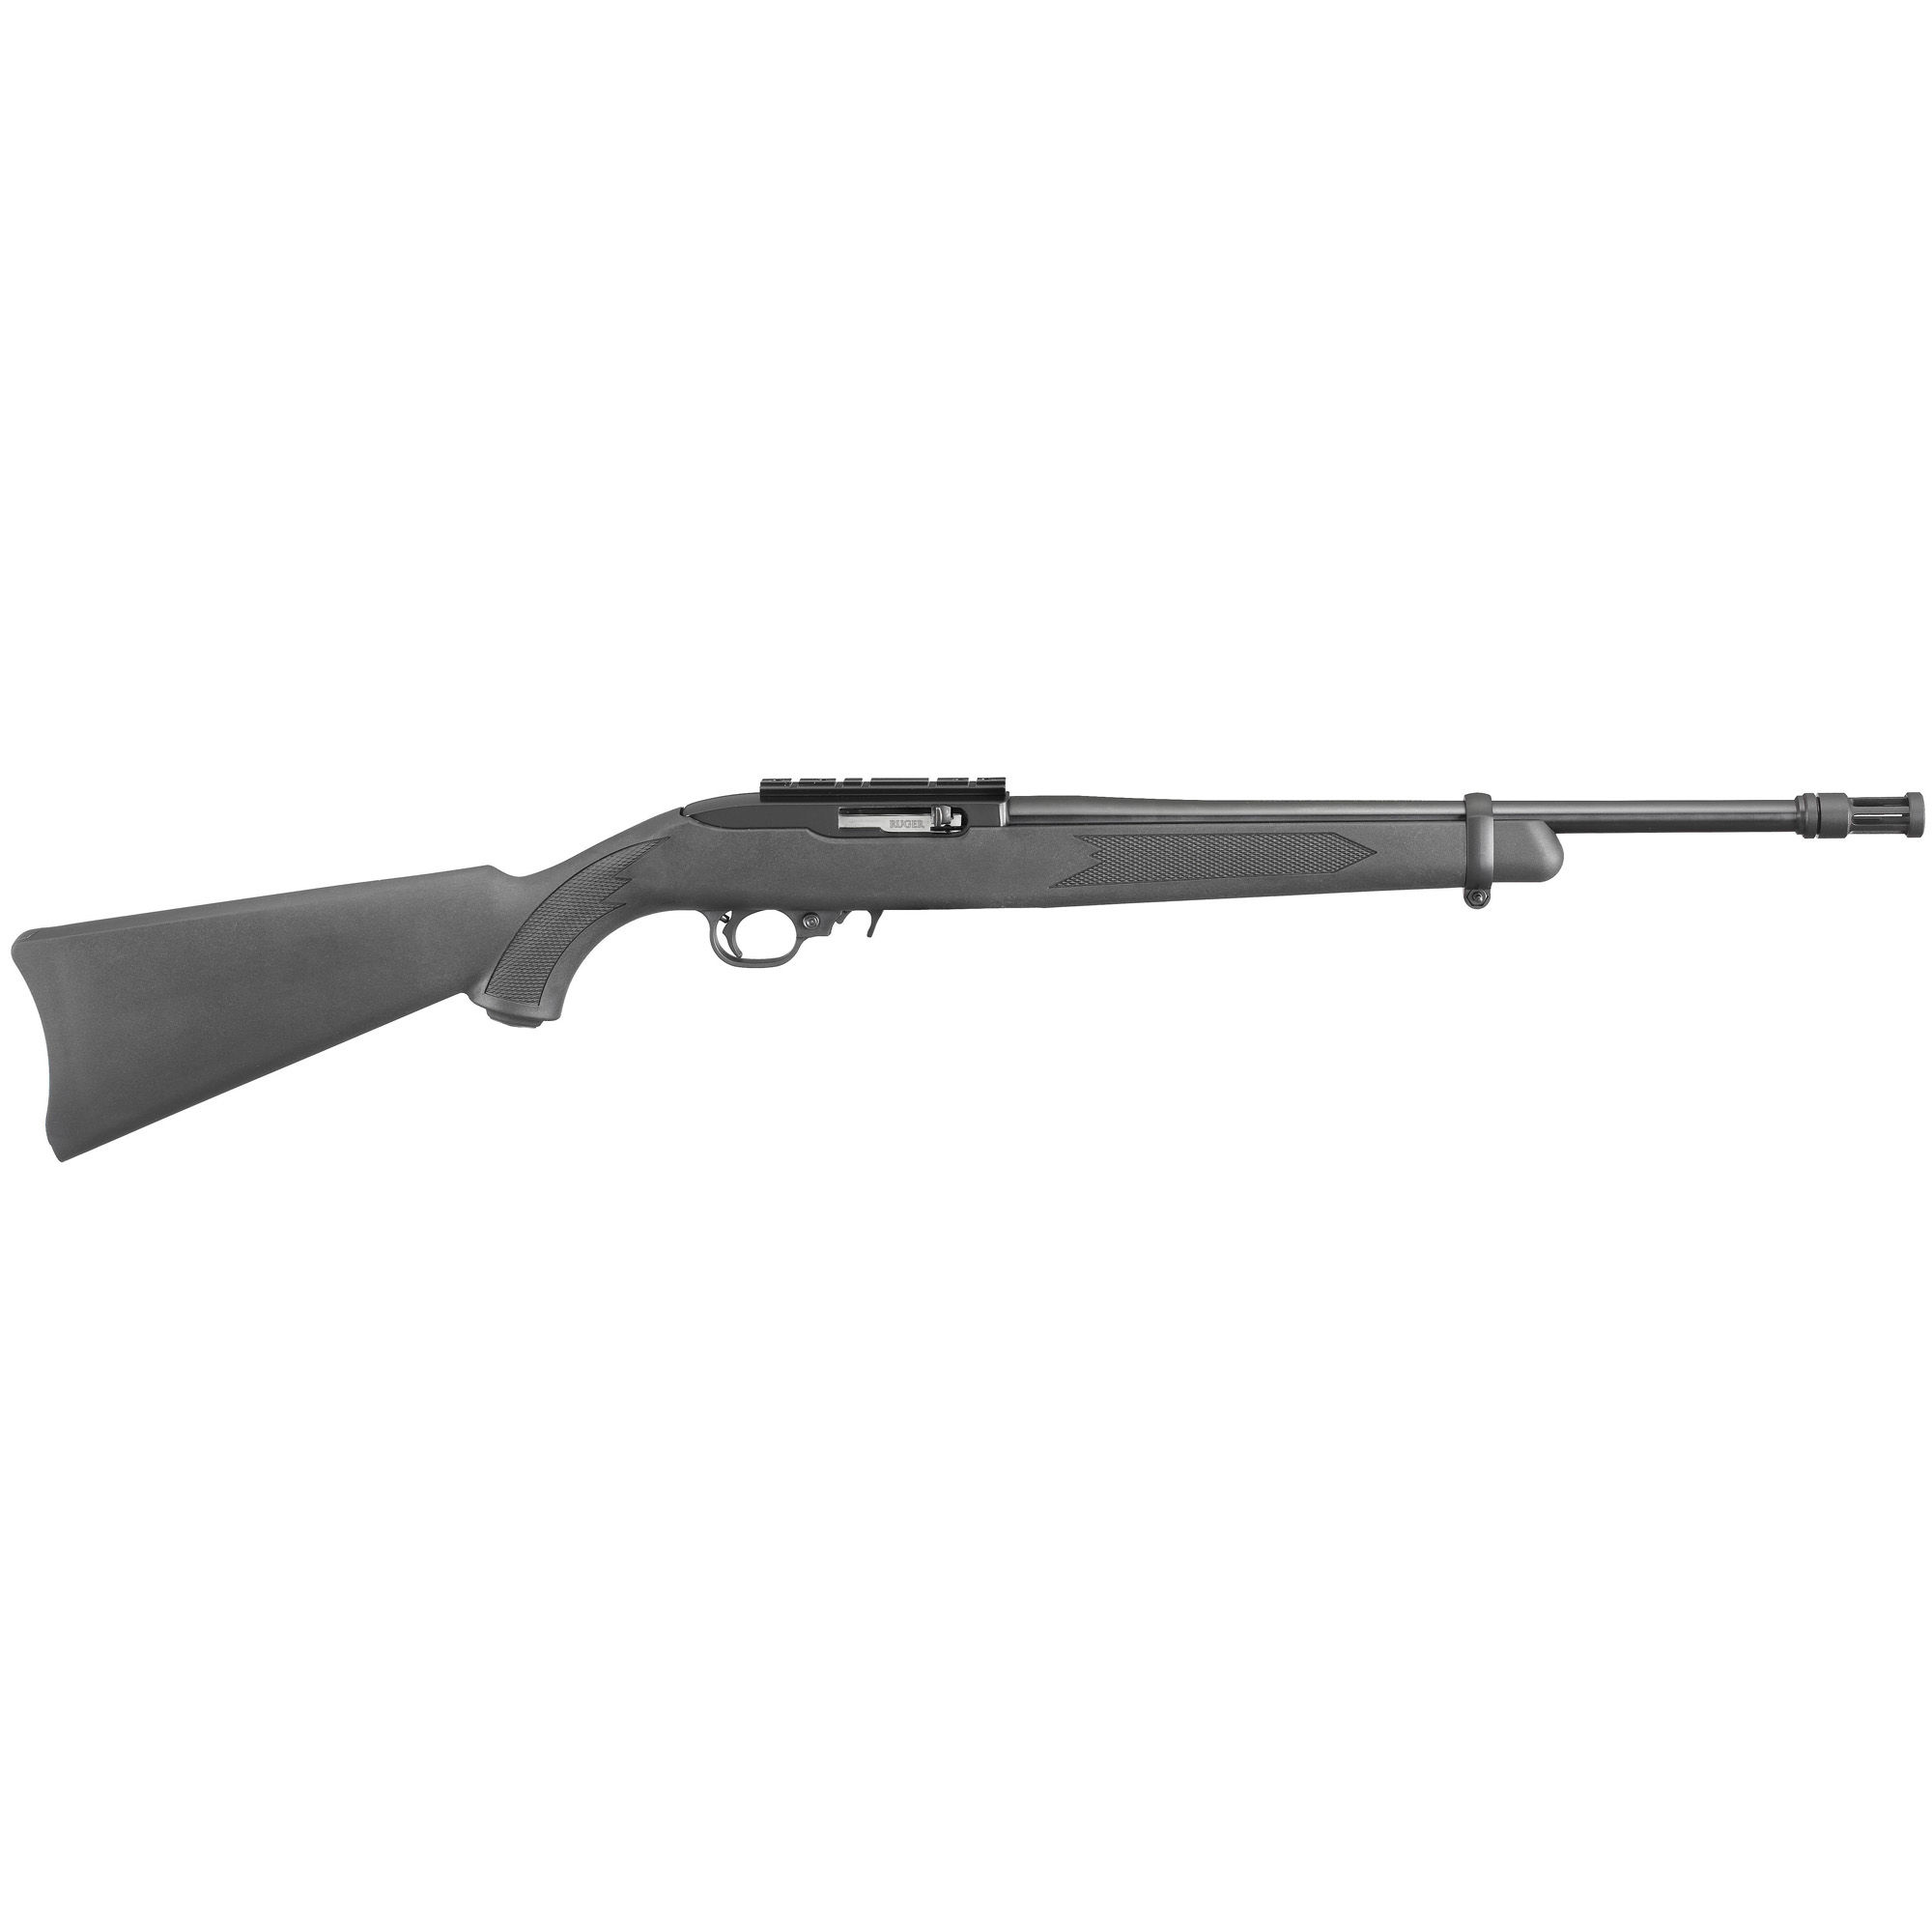 RUGER 10/22 TACT 22LR 16.1 10RD SYN